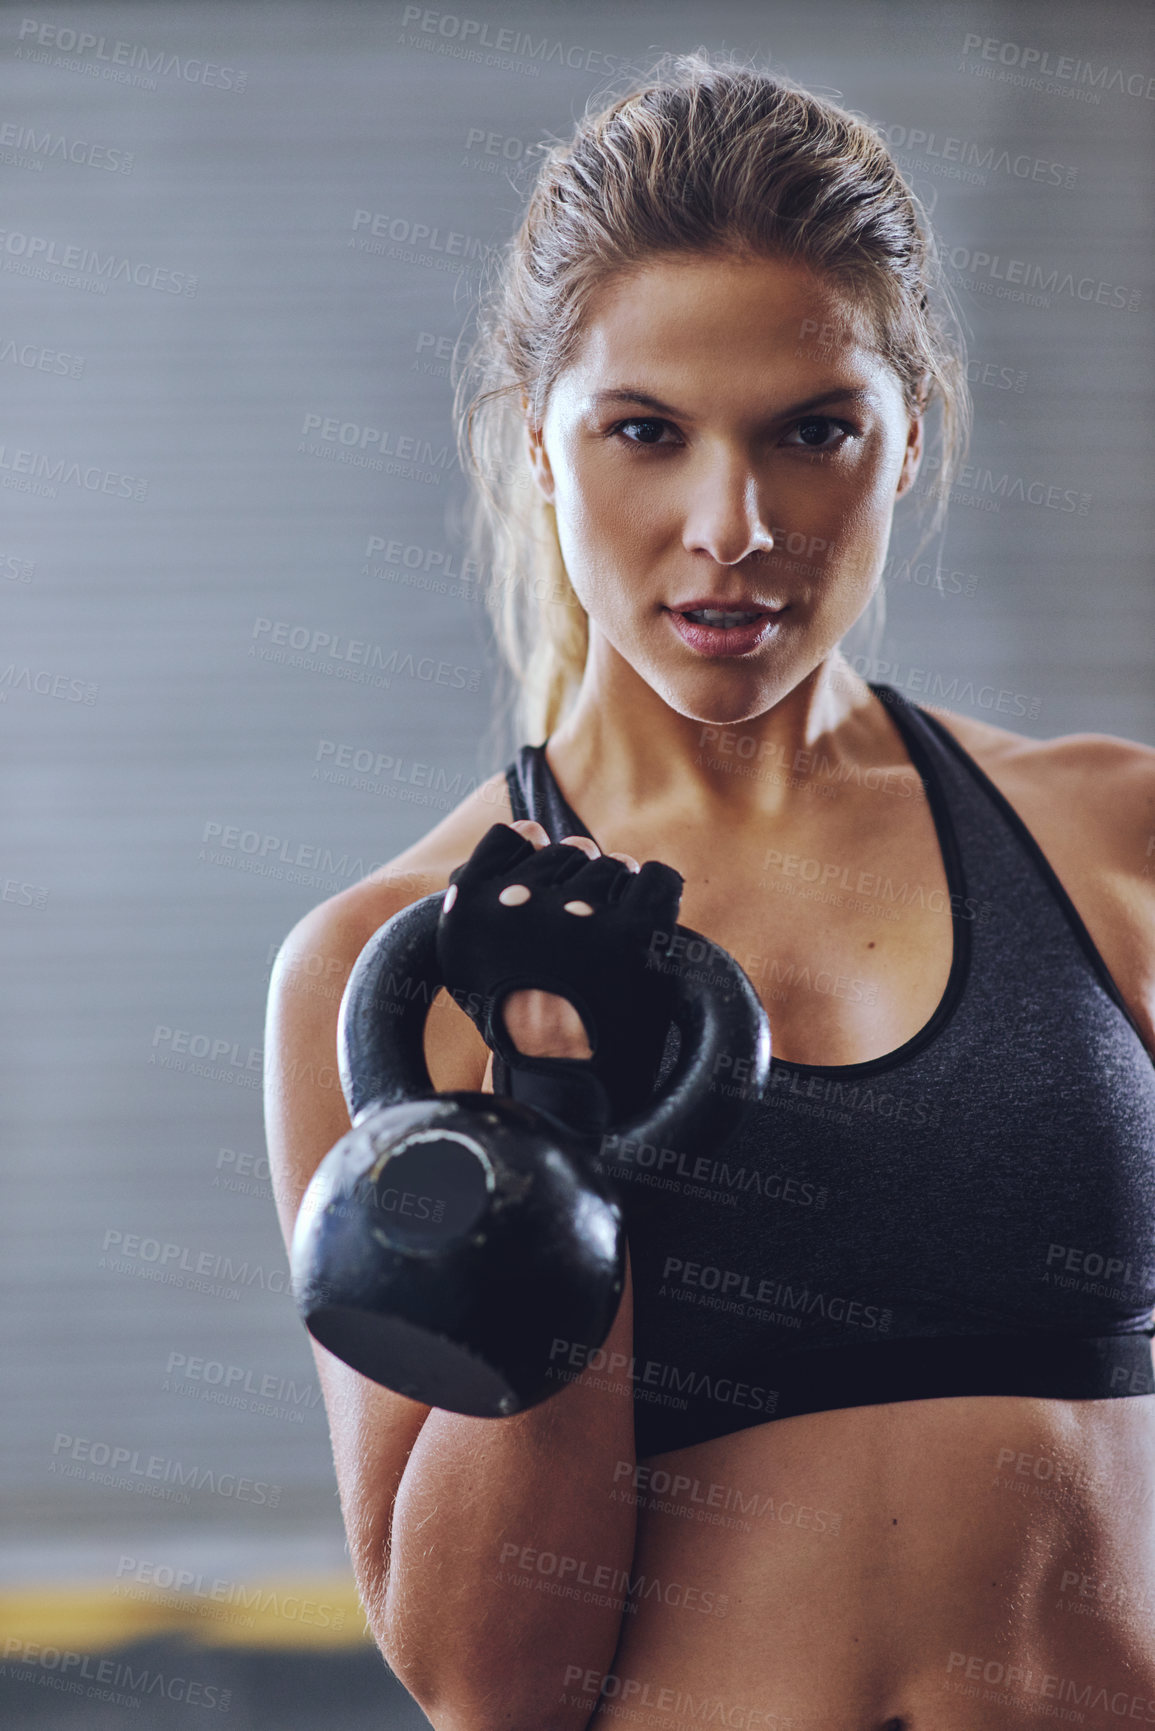 Buy stock photo Shot of a young woman working out with kettlebells